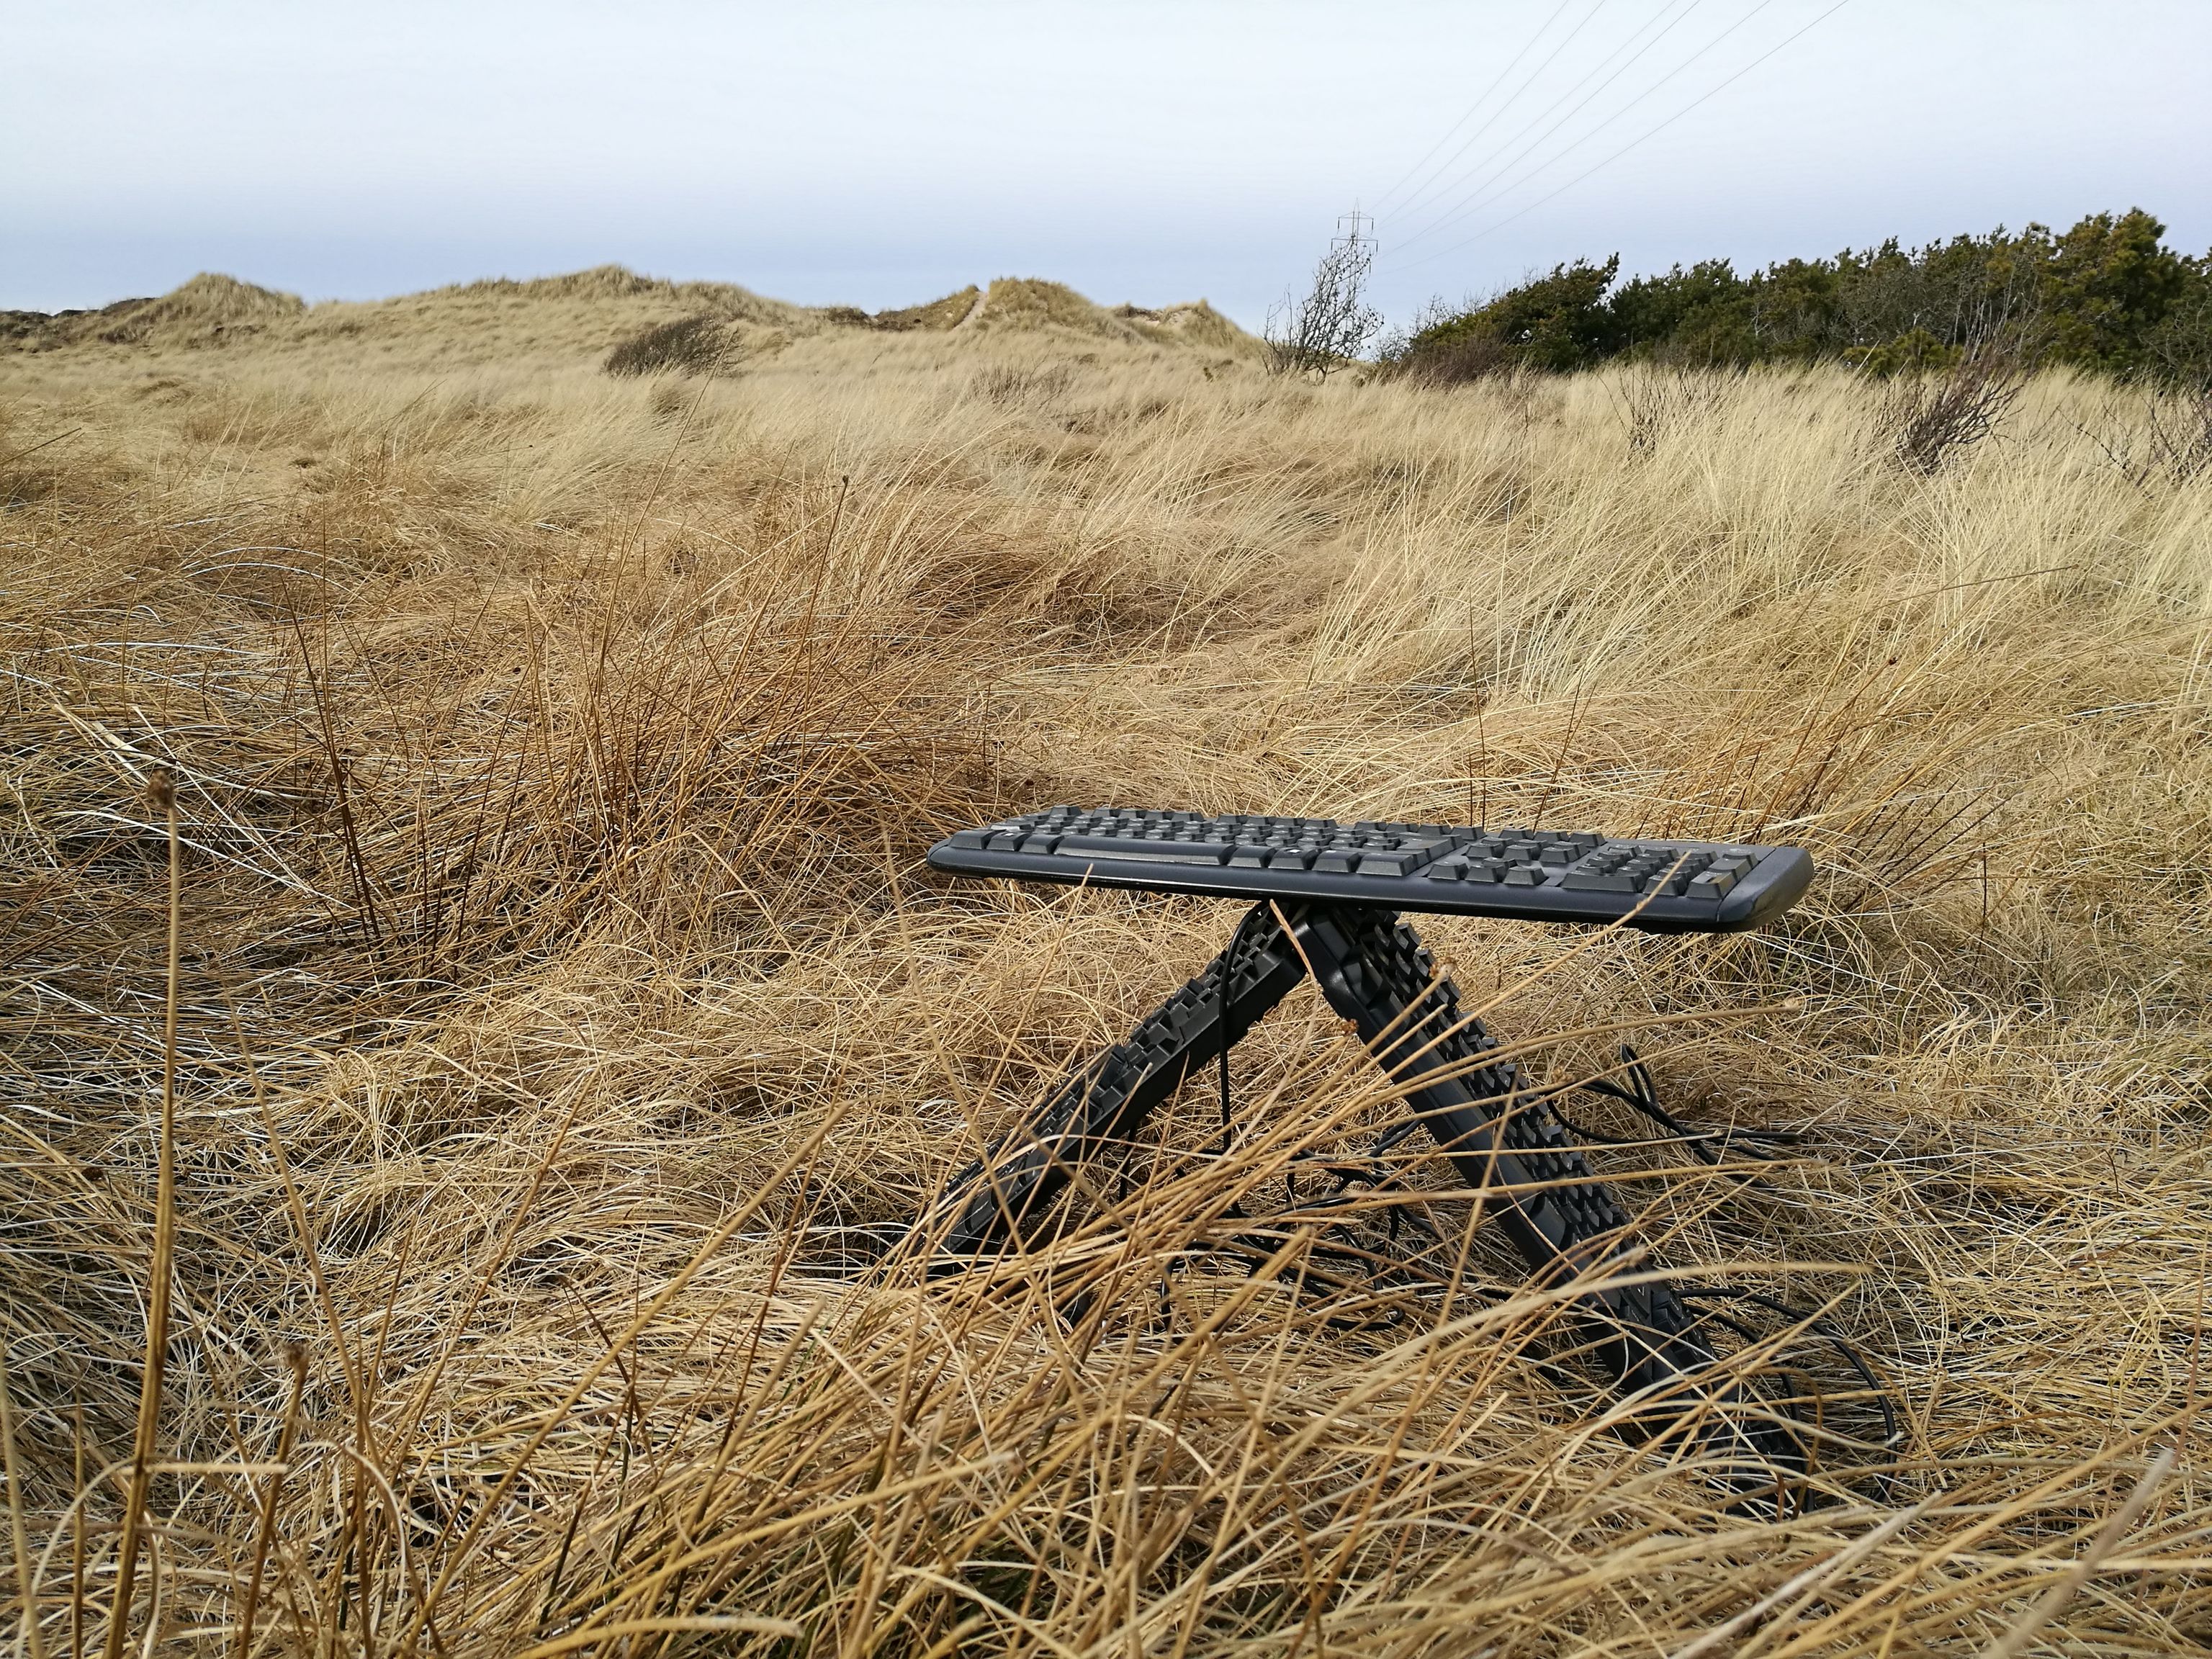 Two keyboards are placed next to each other. A third keyboard lies on this triangle. There are dunes in the background.